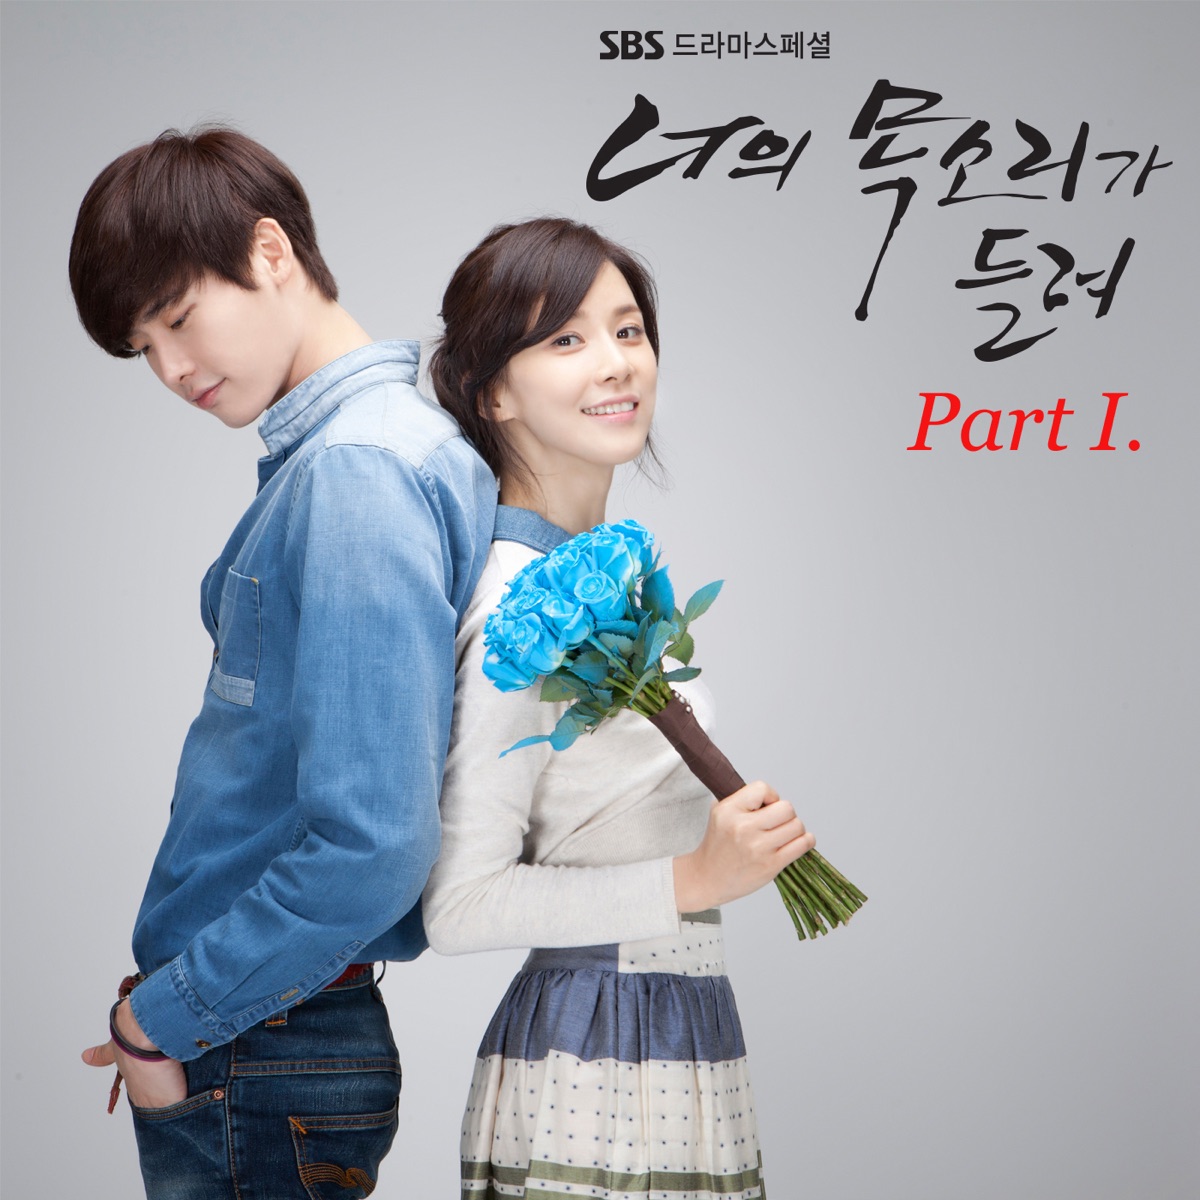 Every Single Day – I Can Hear Your Voice OST – Part.1